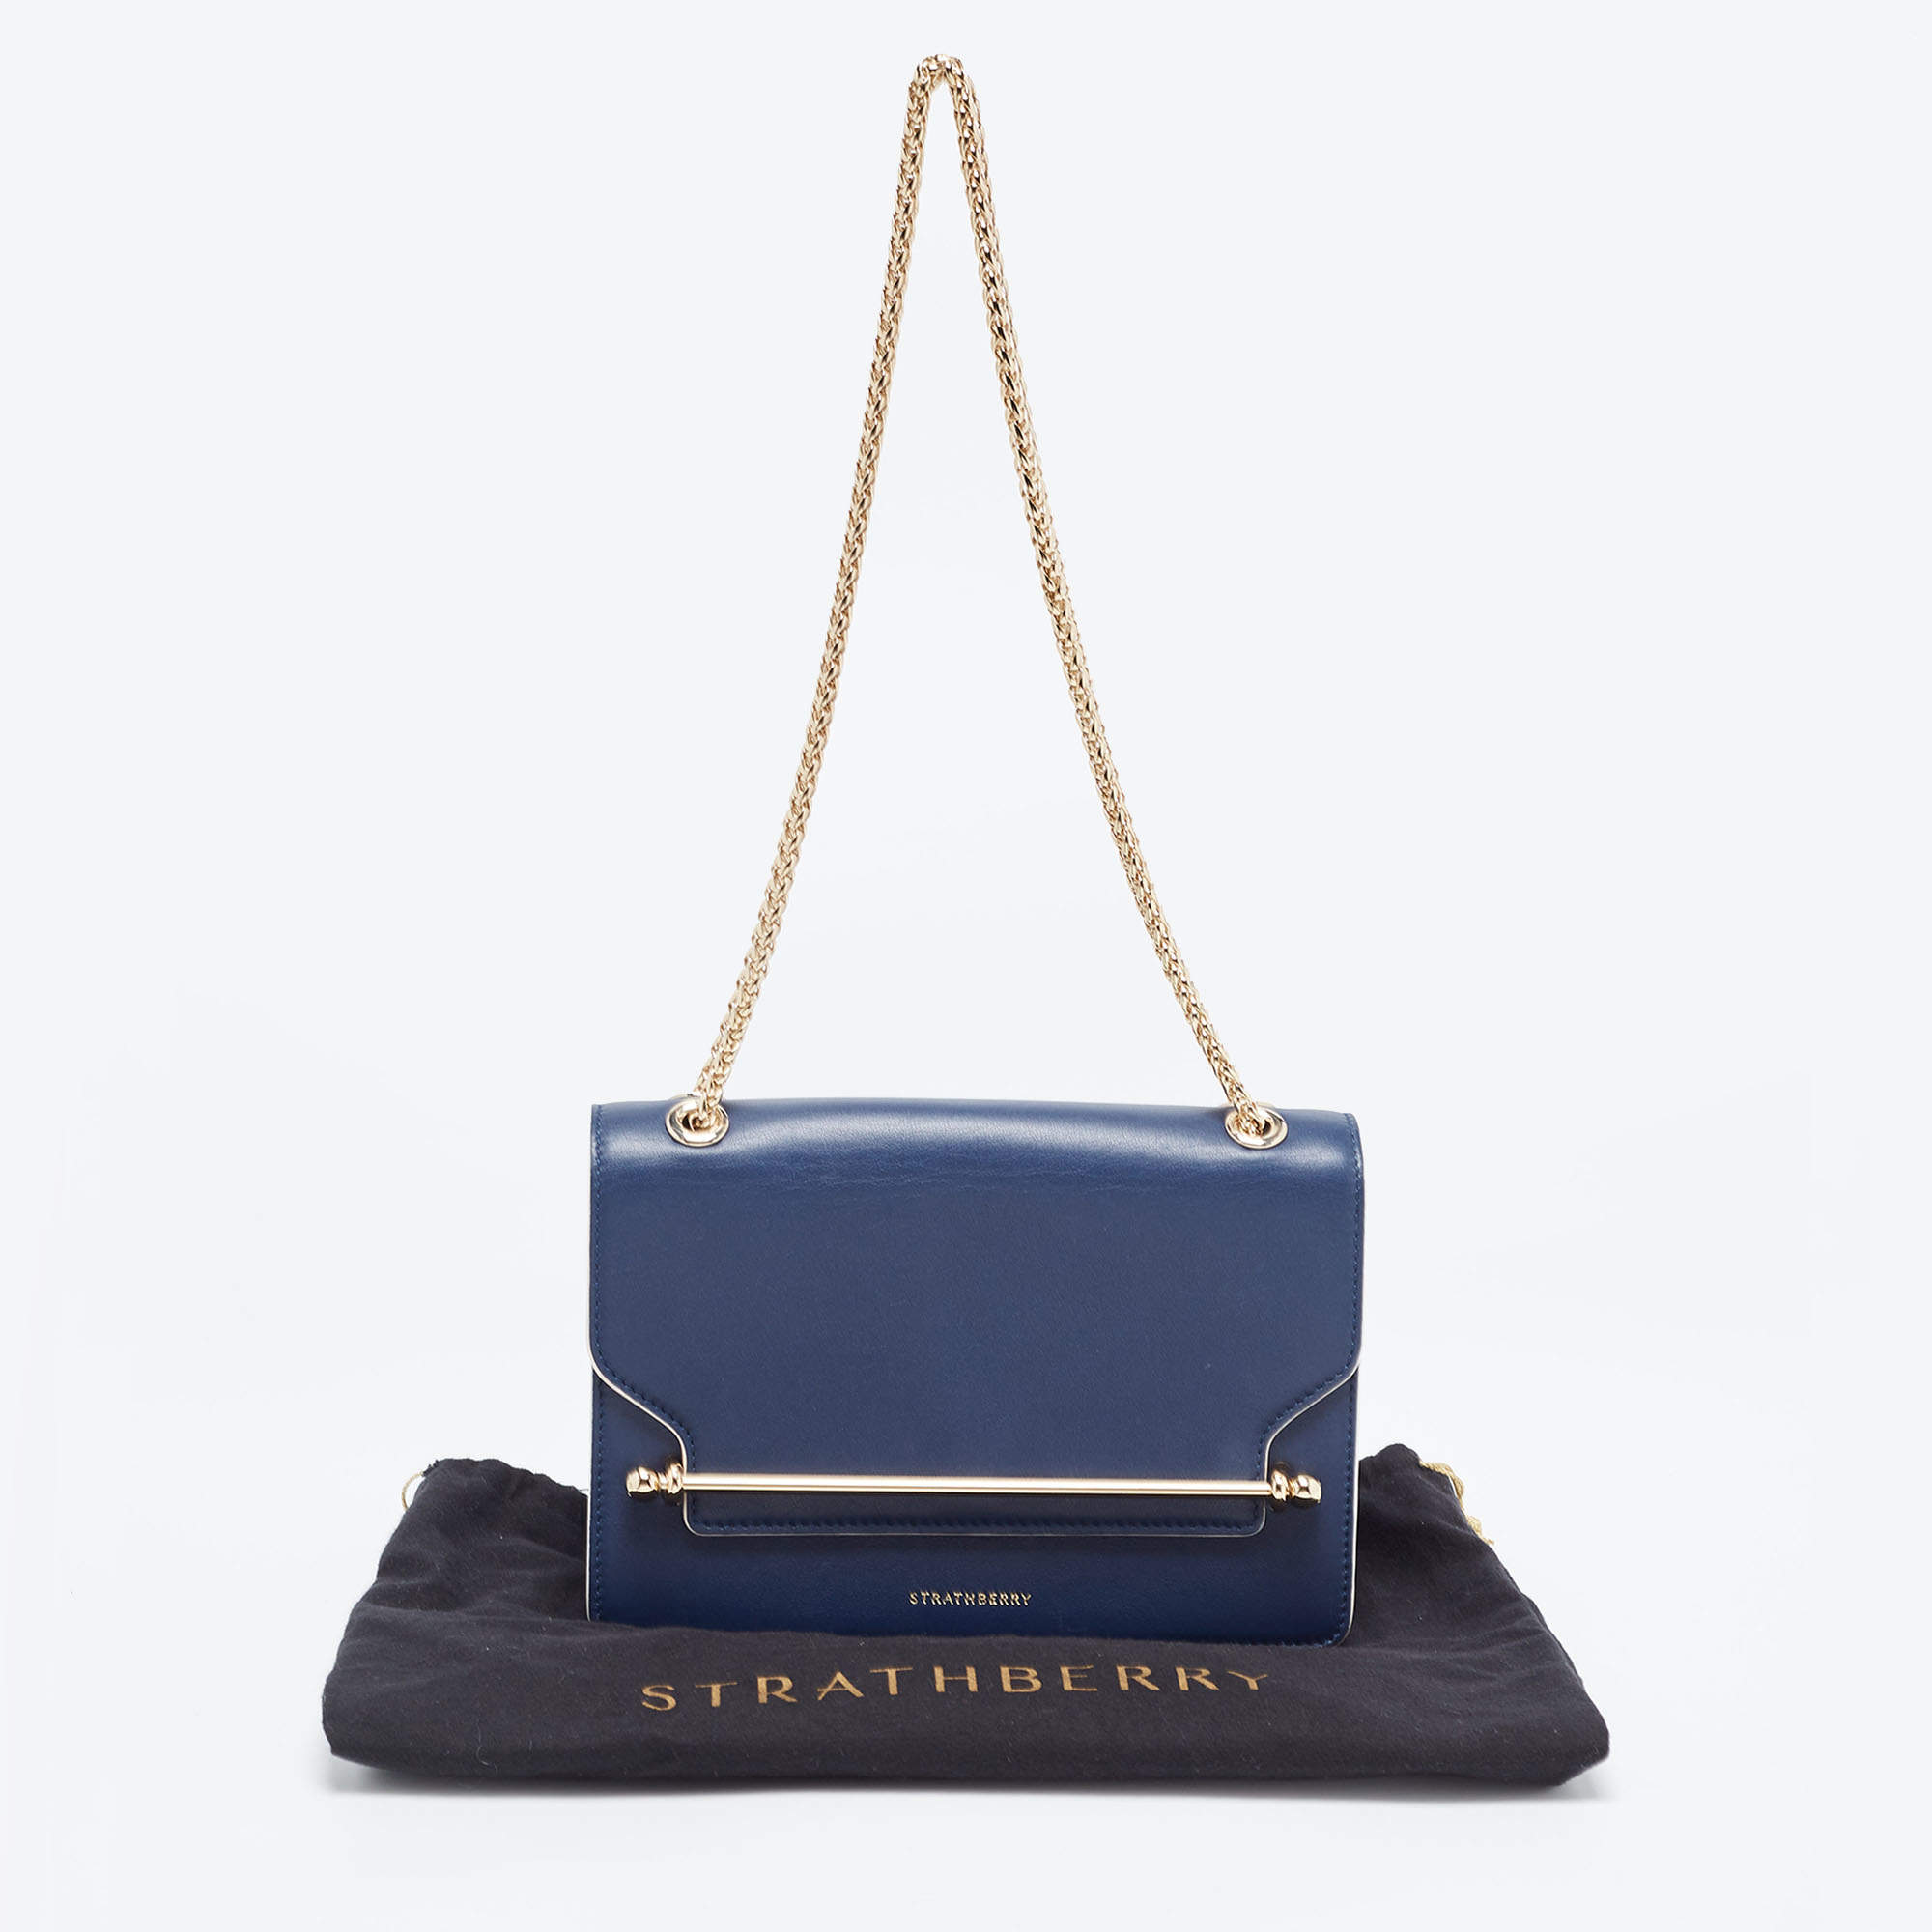 Strathberry Navy Blue Leather East West Shoulder Bags Strathberry